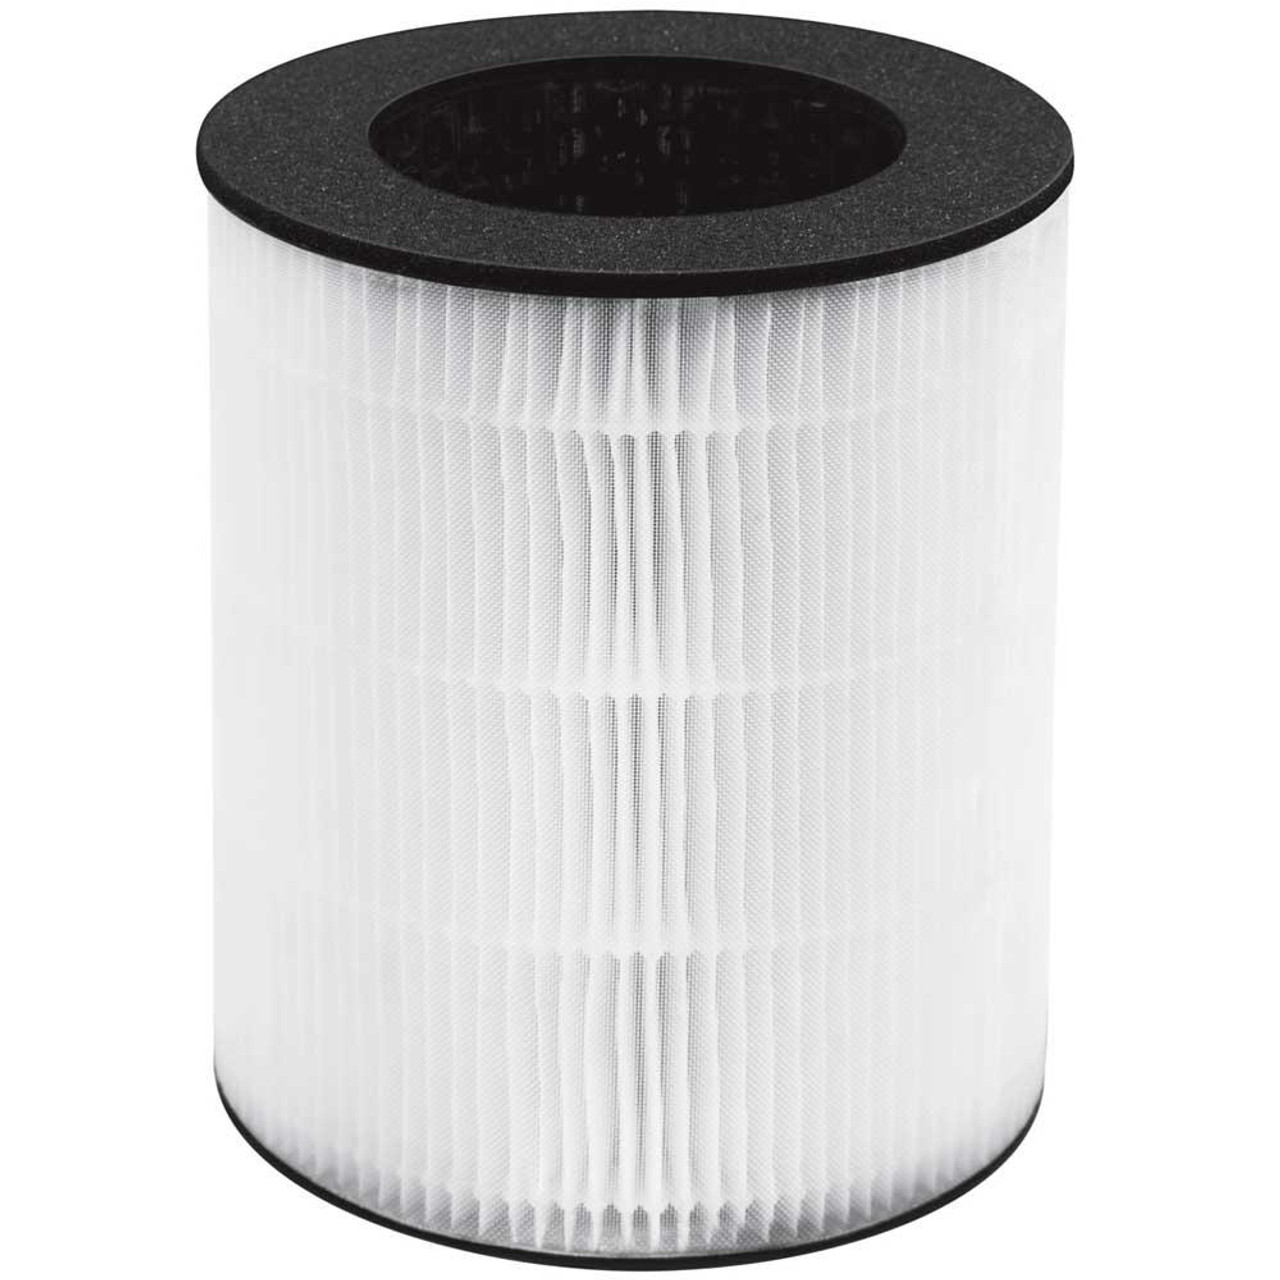 Clean Parts 5/10 Pcs Replacement HEPA Filter Cup Fit for Black